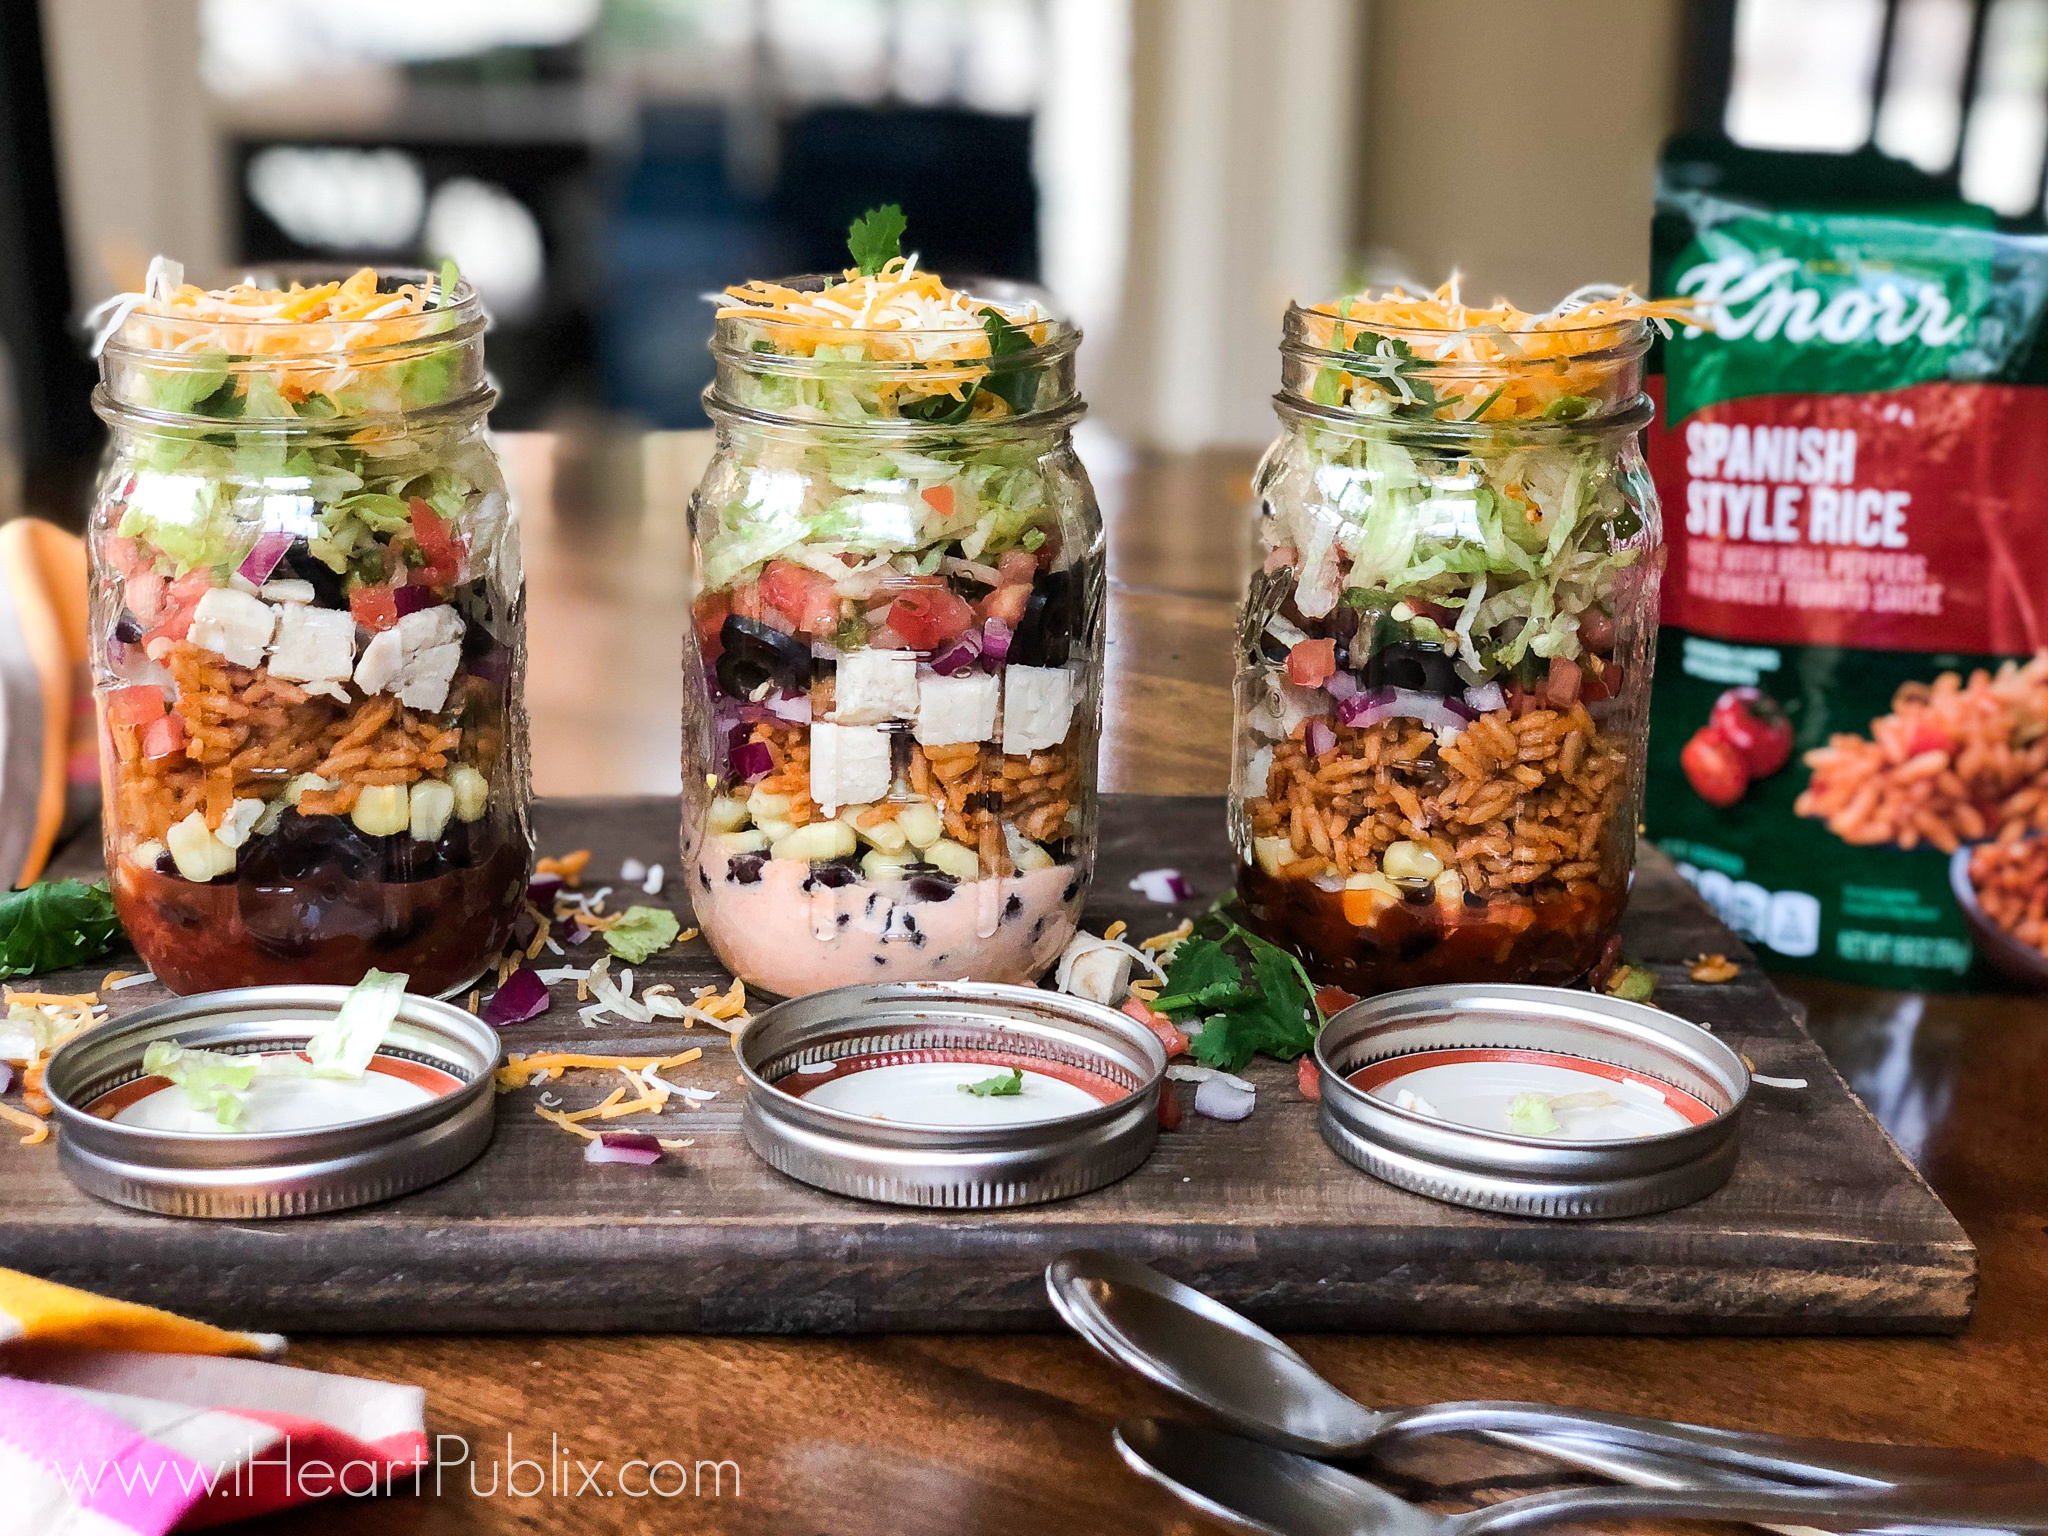 Southwestern Burrito Jars Are The Perfect Make-Ahead Meal For Your Busy Schedule on I Heart Publix